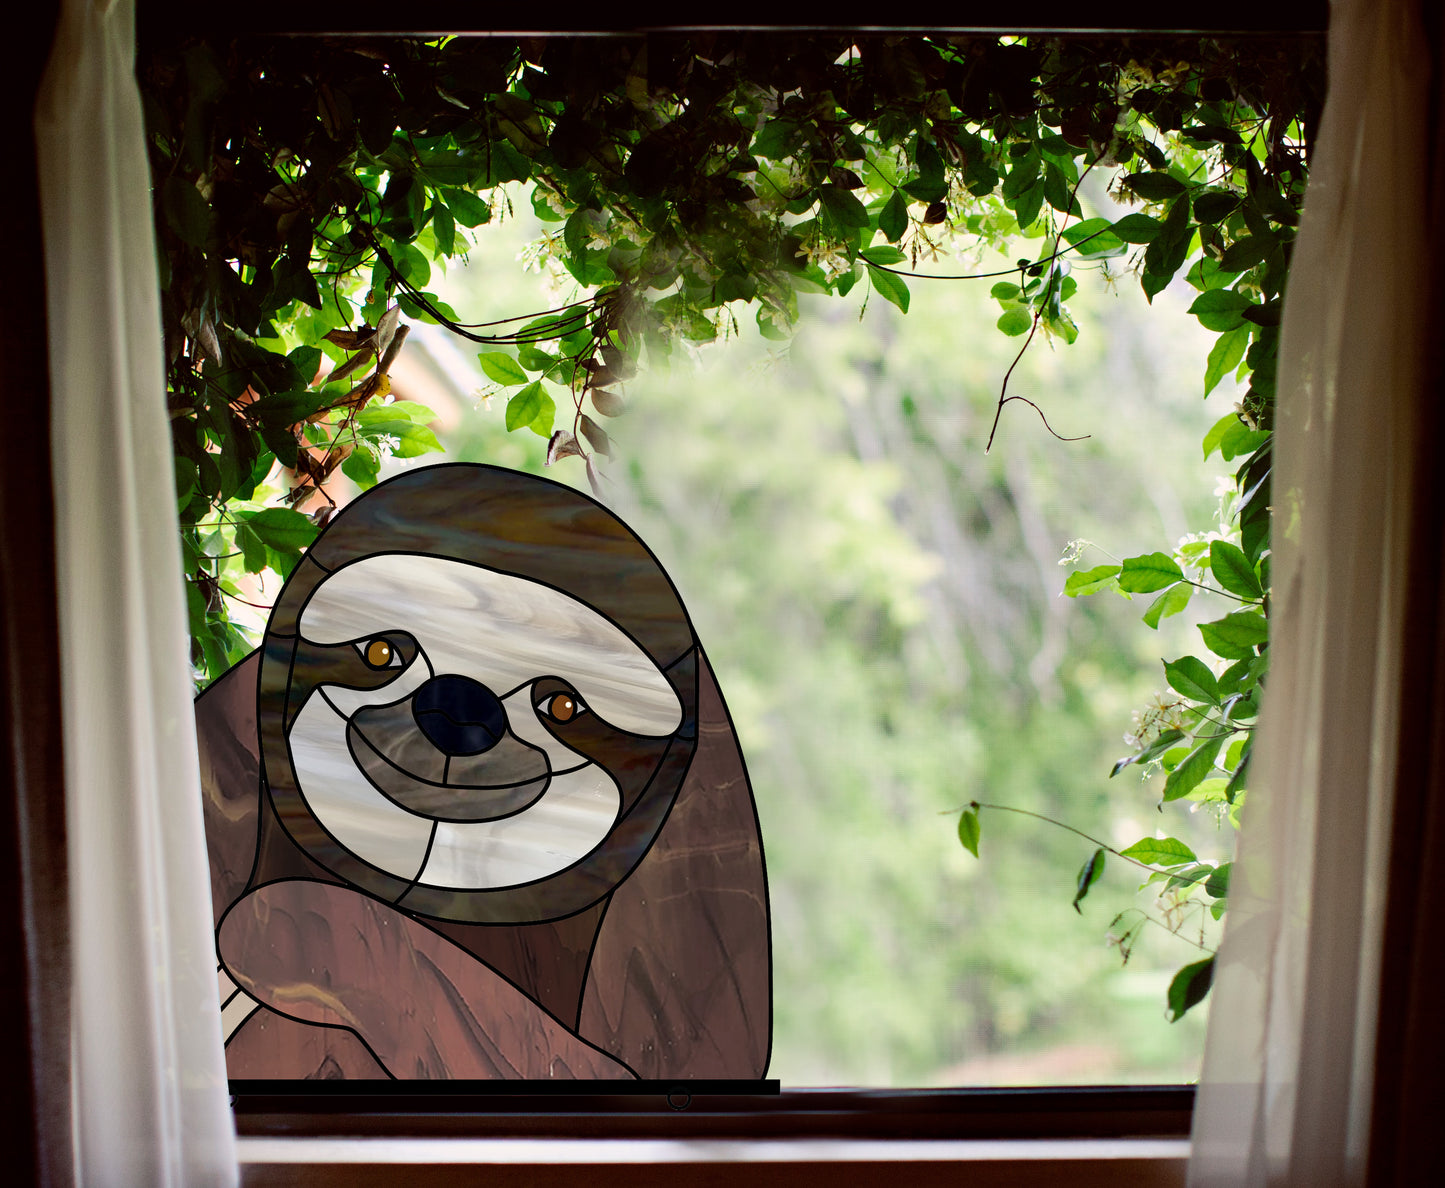 Stained glass pattern for a sloth peeking in the window, instant PDF download, shown in a window with ivy